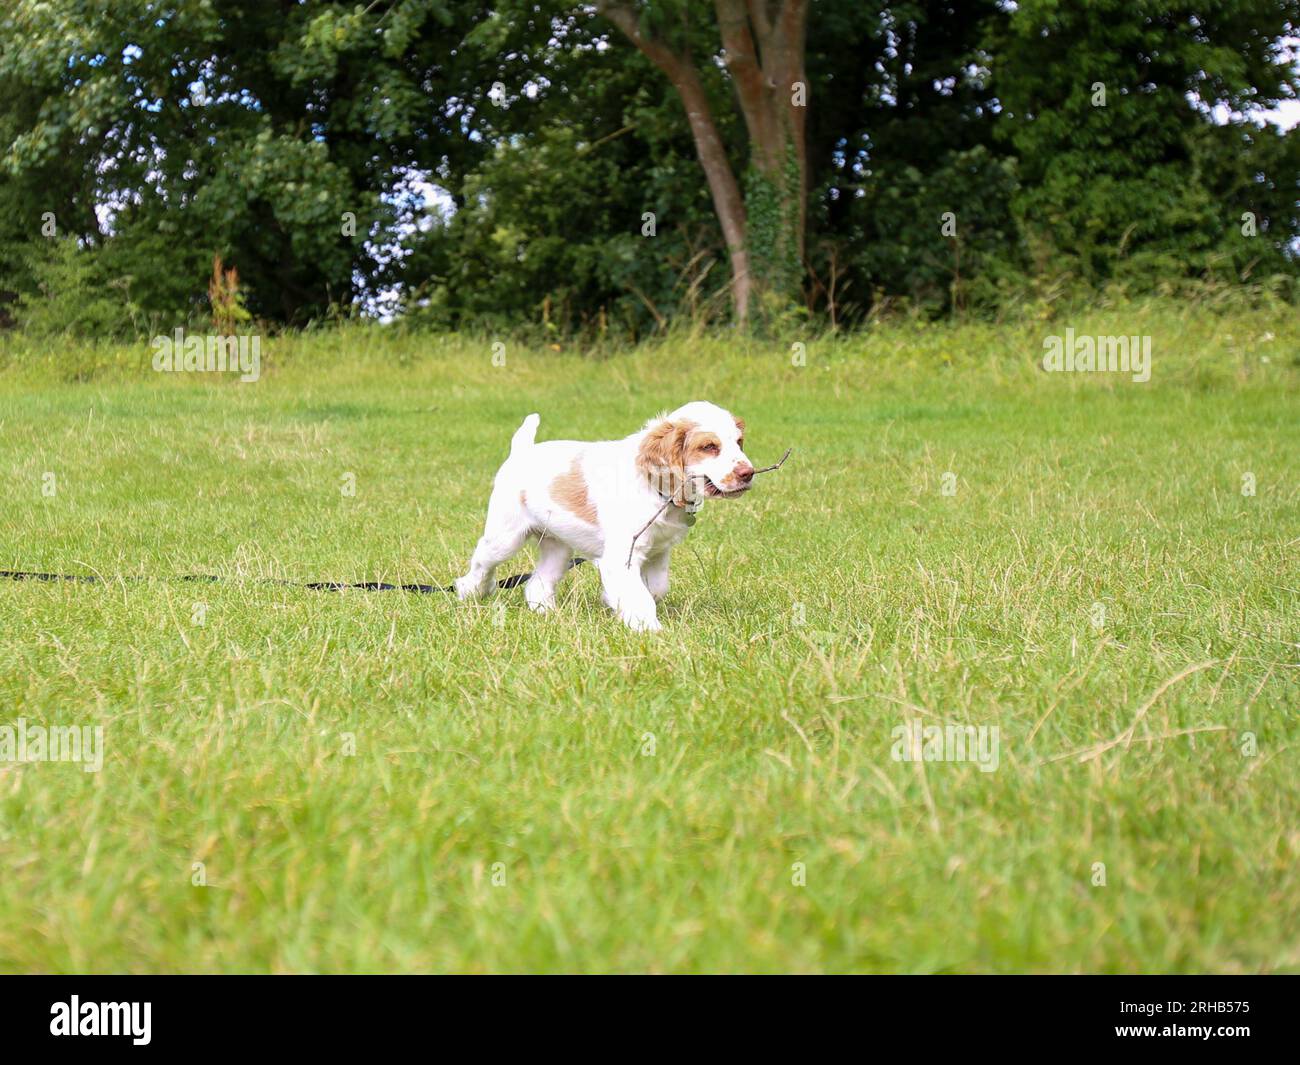 Working Clumber Spaniel Puppy in field on training line Stock Photo